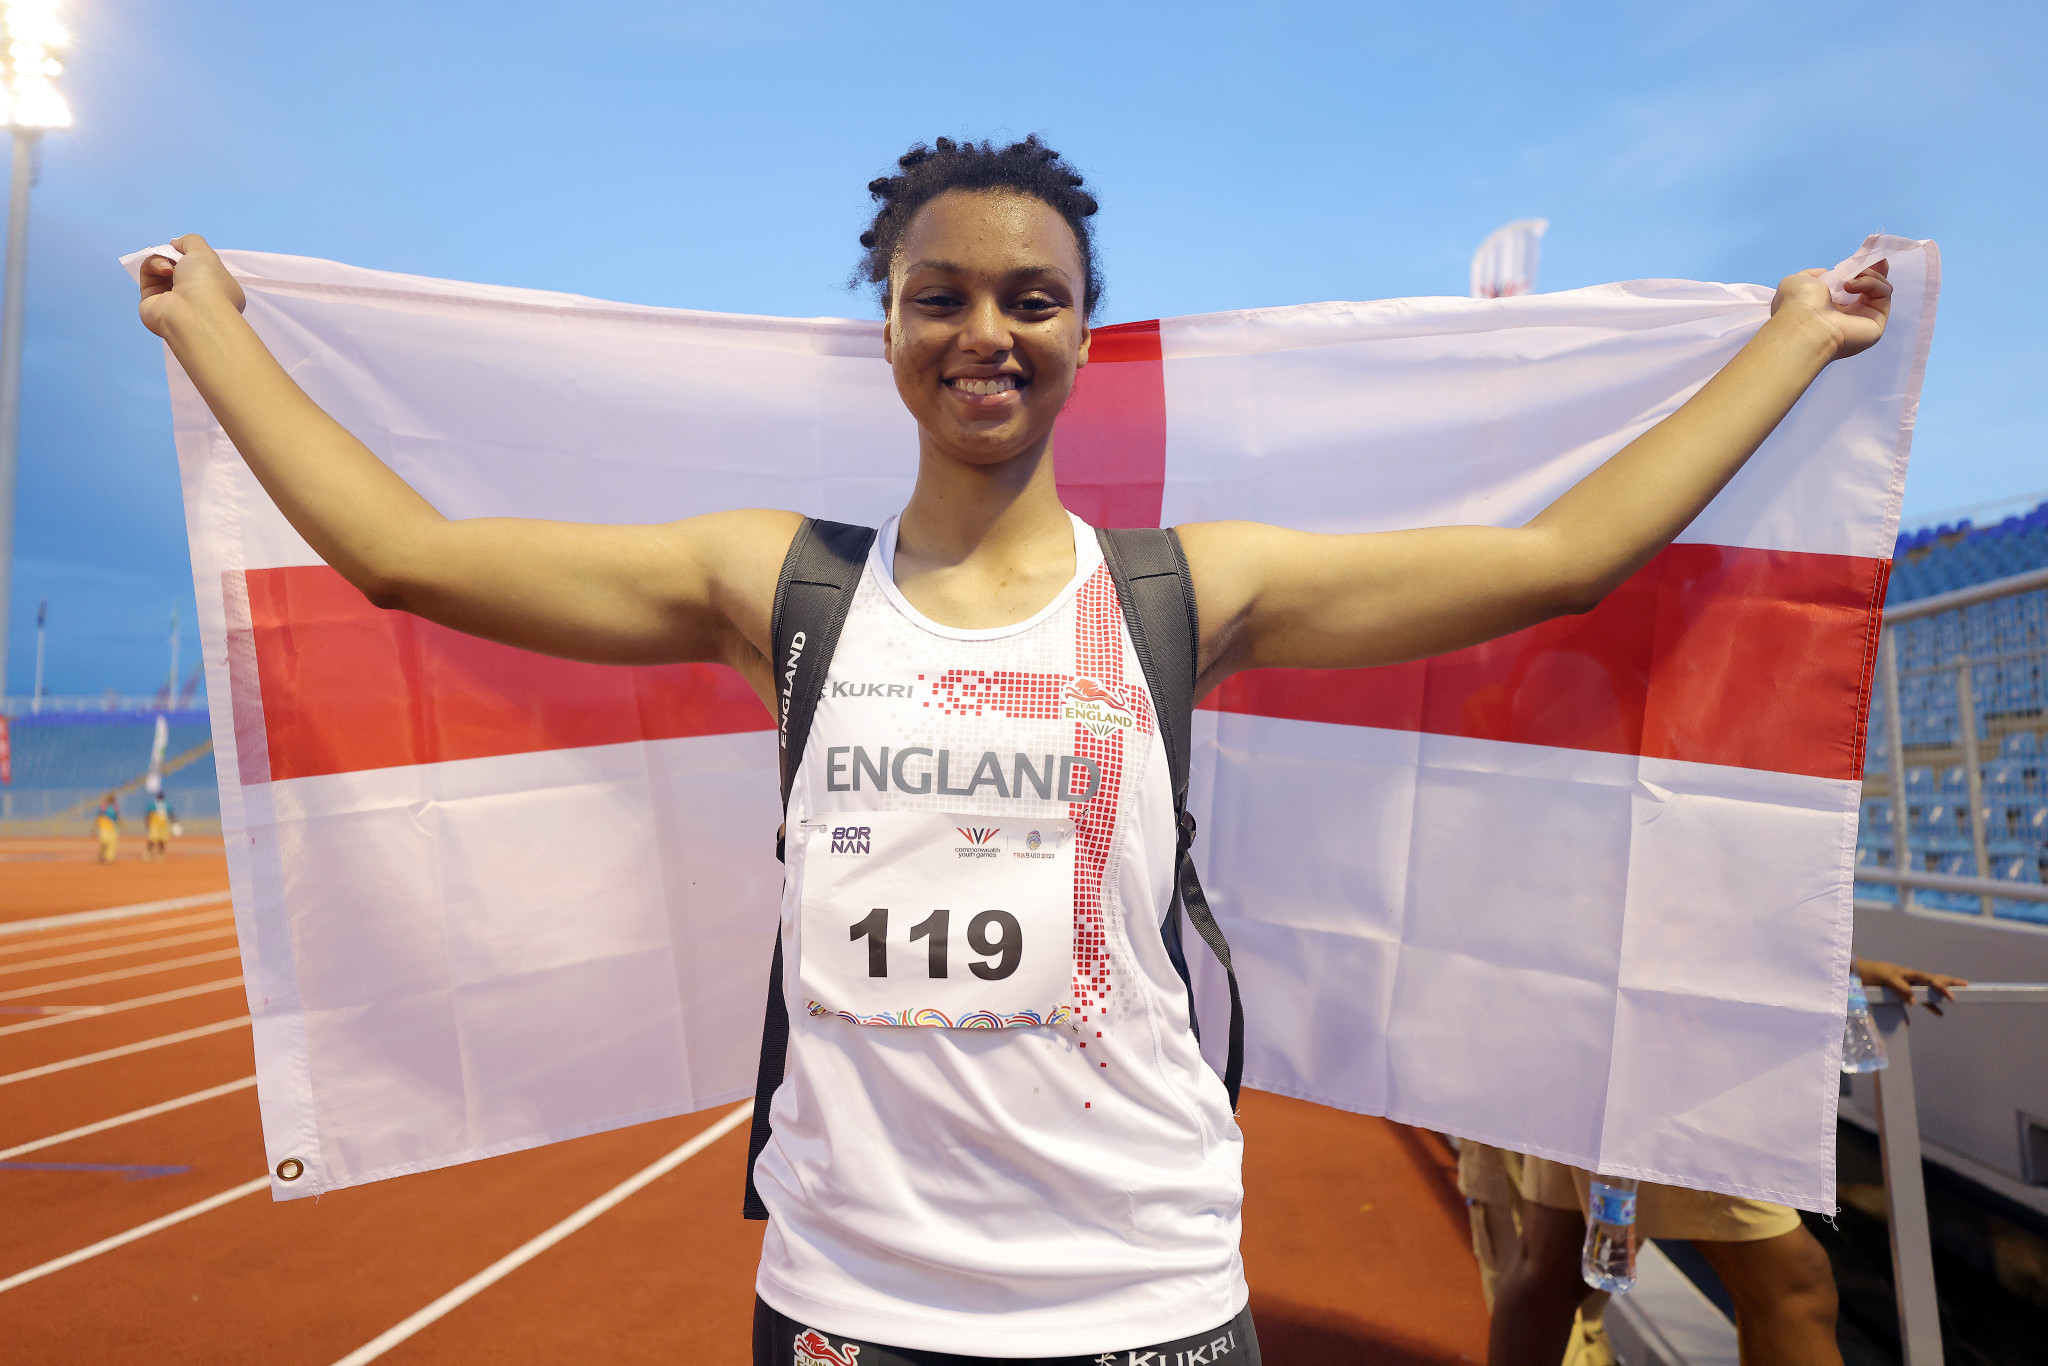 England excel on penultimate day of athletics with four golds at Commonwealth Youth Games